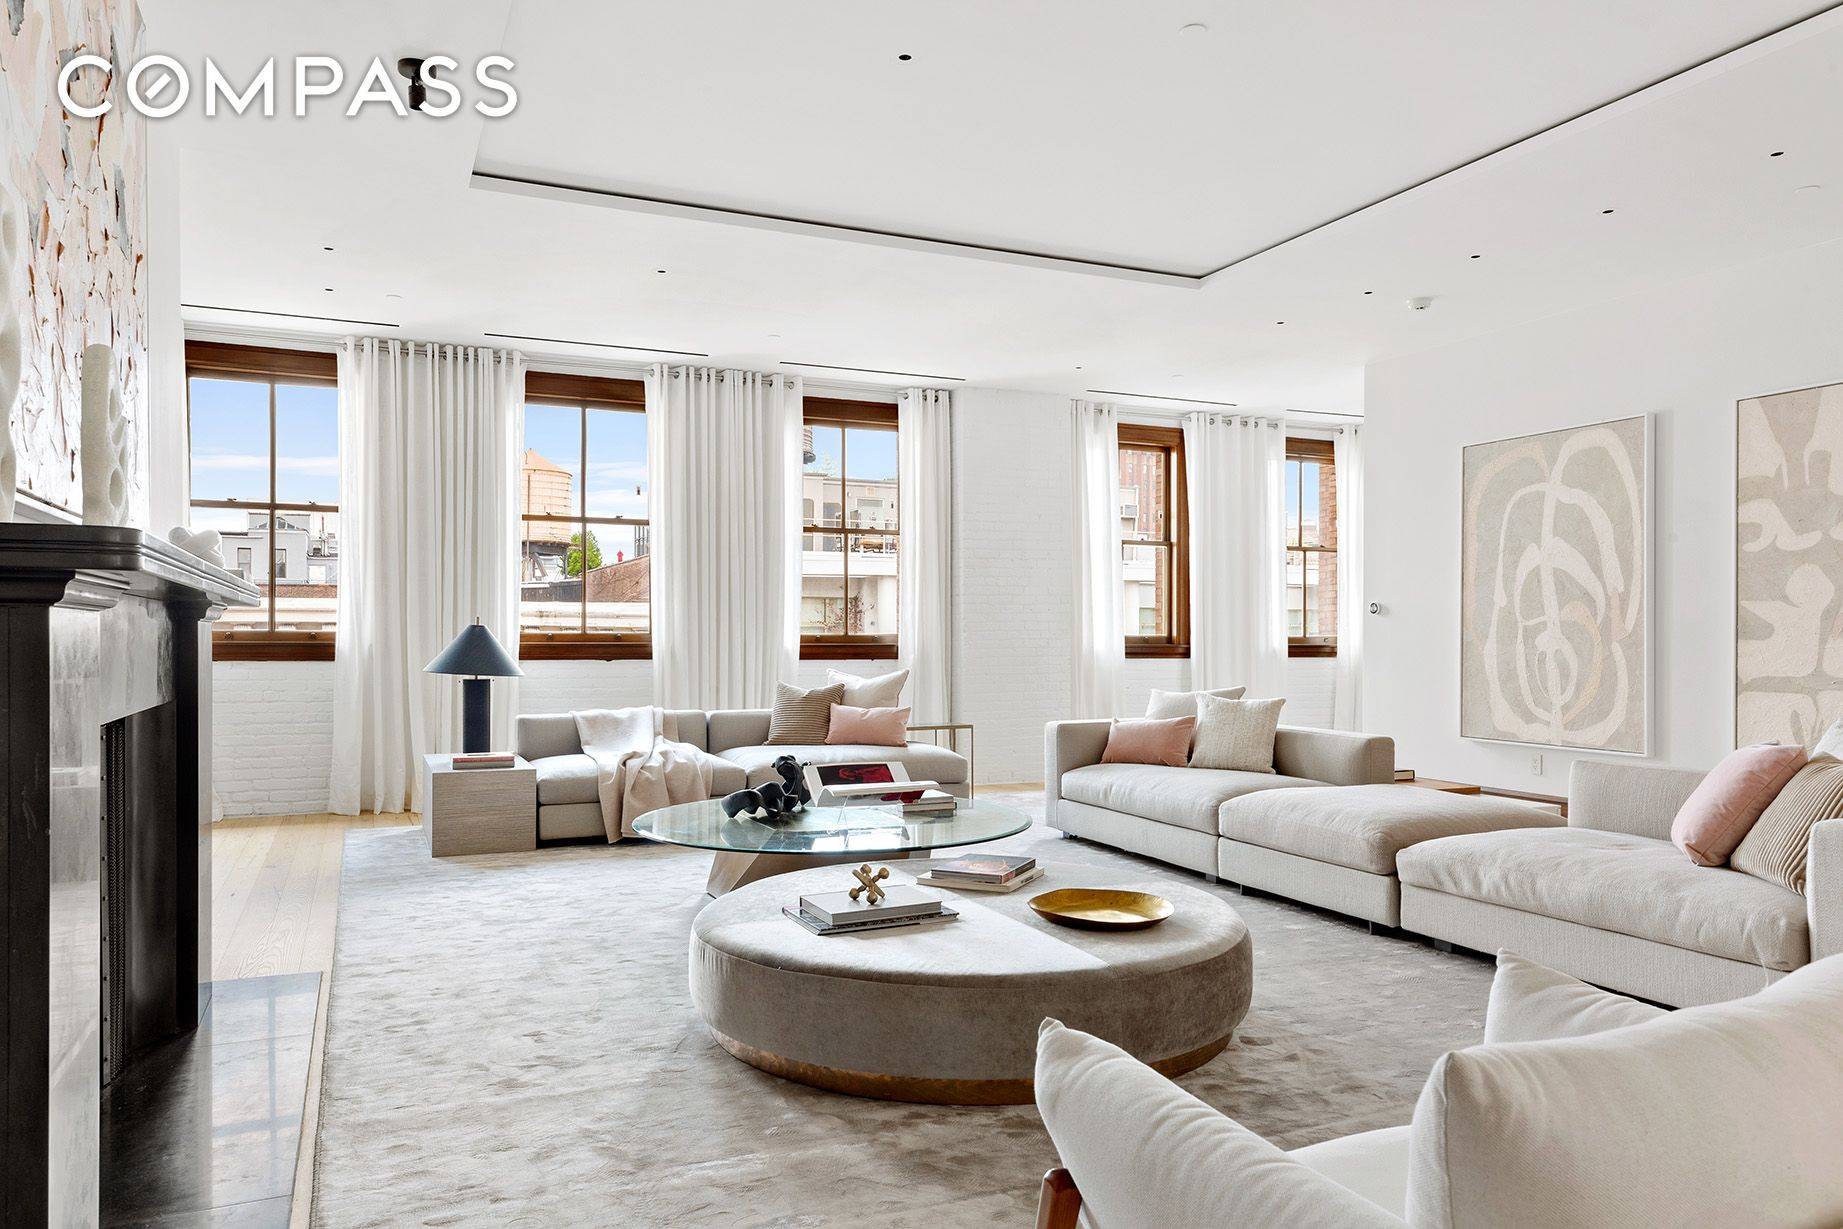 Newly renovated in 2022, this expansive and custom designed penthouse boasts a sprawling well proportioned layout, rooftop infinity pool and expansive private outdoor space atop the Roebling Building in Tribeca.